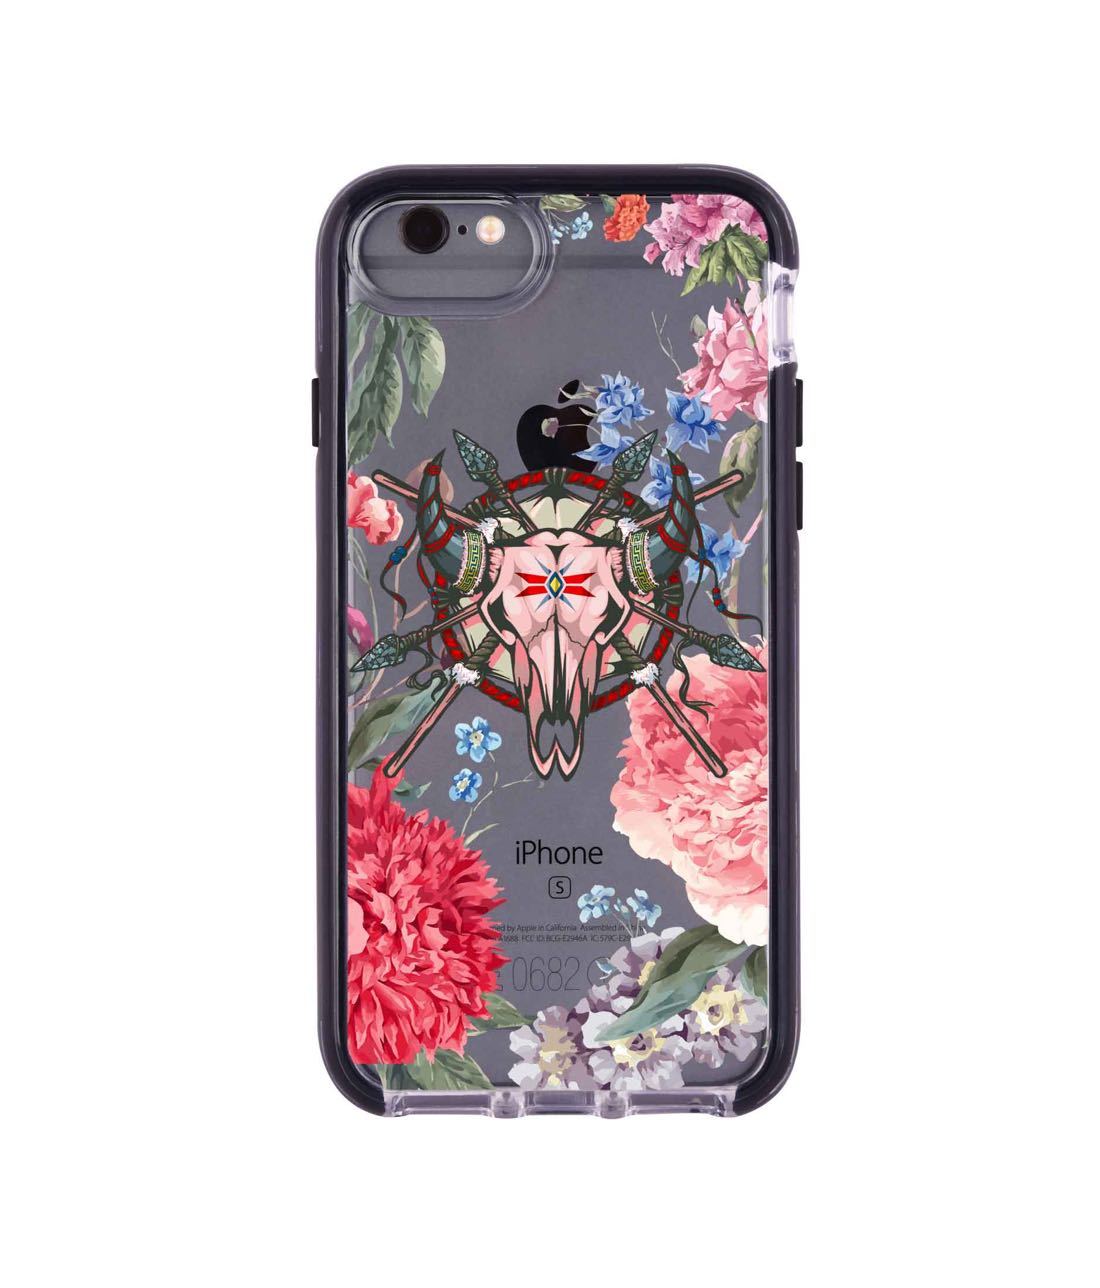 Floral Symmetry - Extreme Phone Case for iPhone 6S